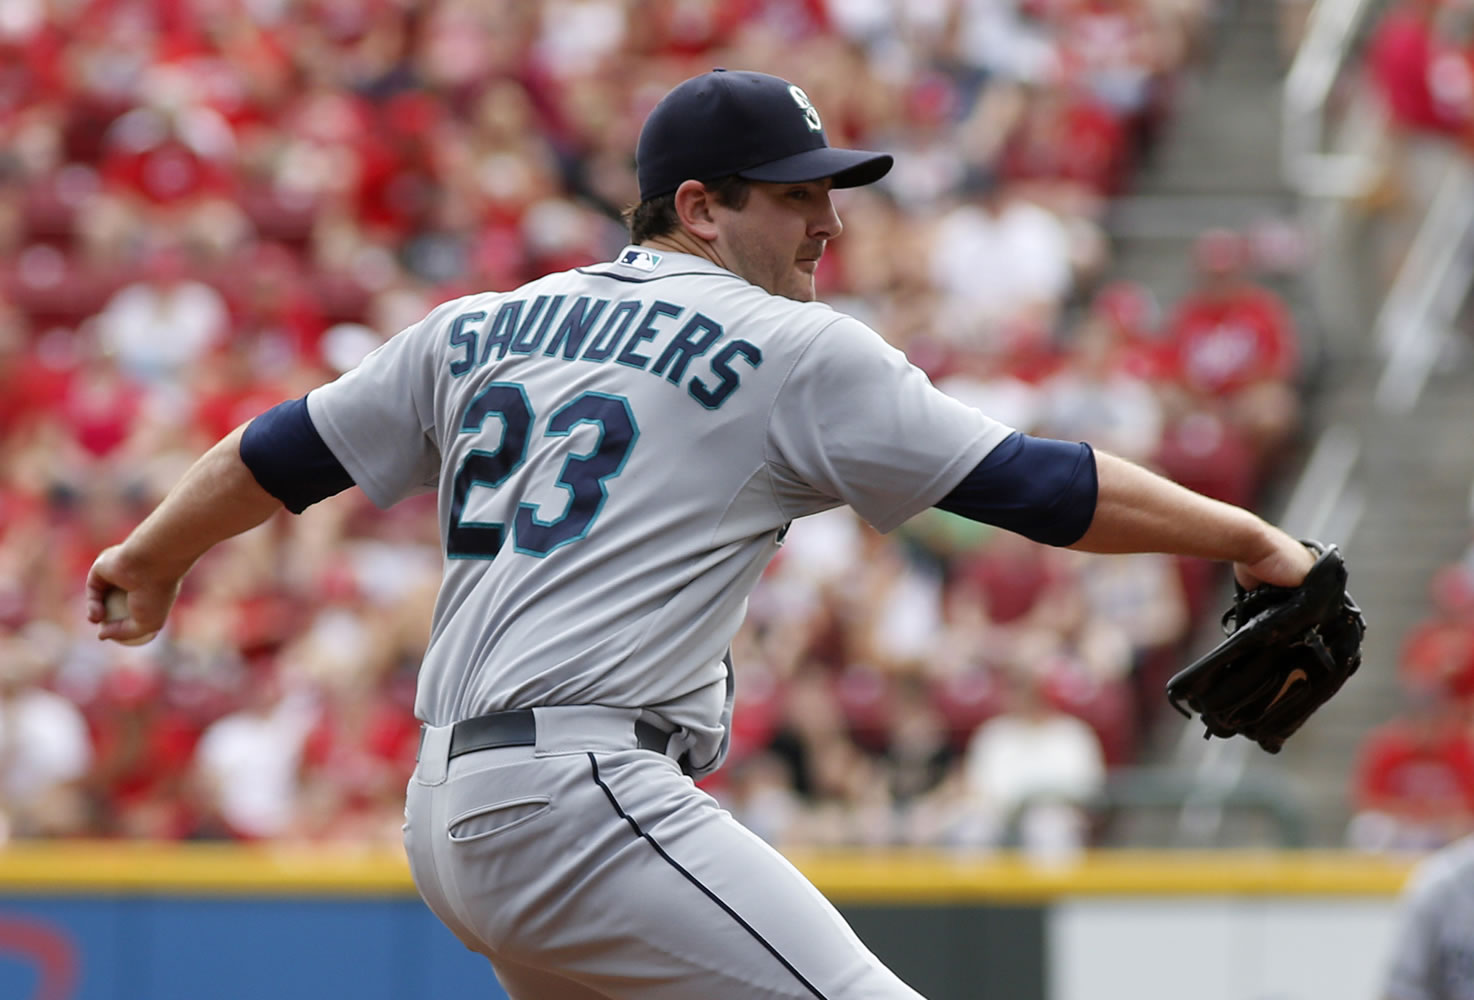 Seattle's Joe Saunders pitched seven solid innings at Cincinnati, limiting the Reds to one run while scatting six hits Sunday in the Mariners' 3-1 victory.